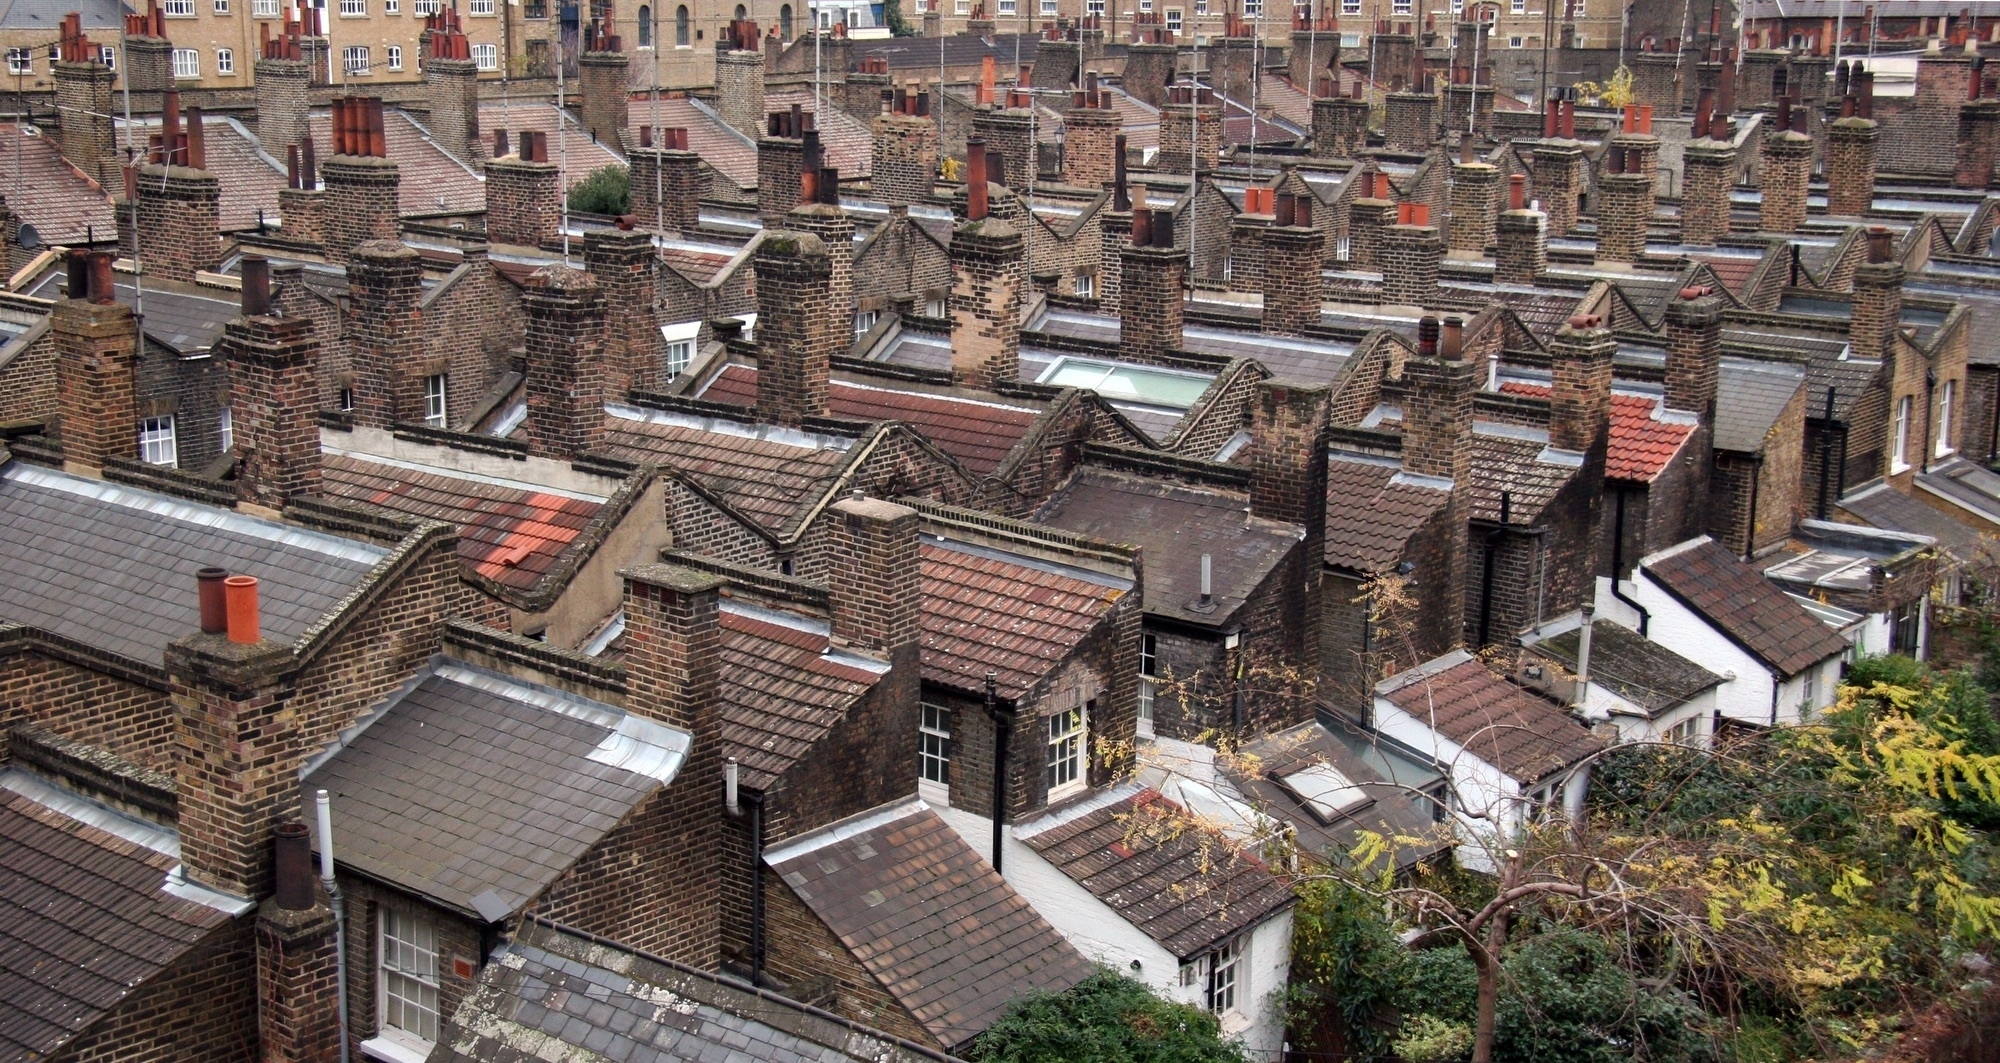 Ss roofs of london